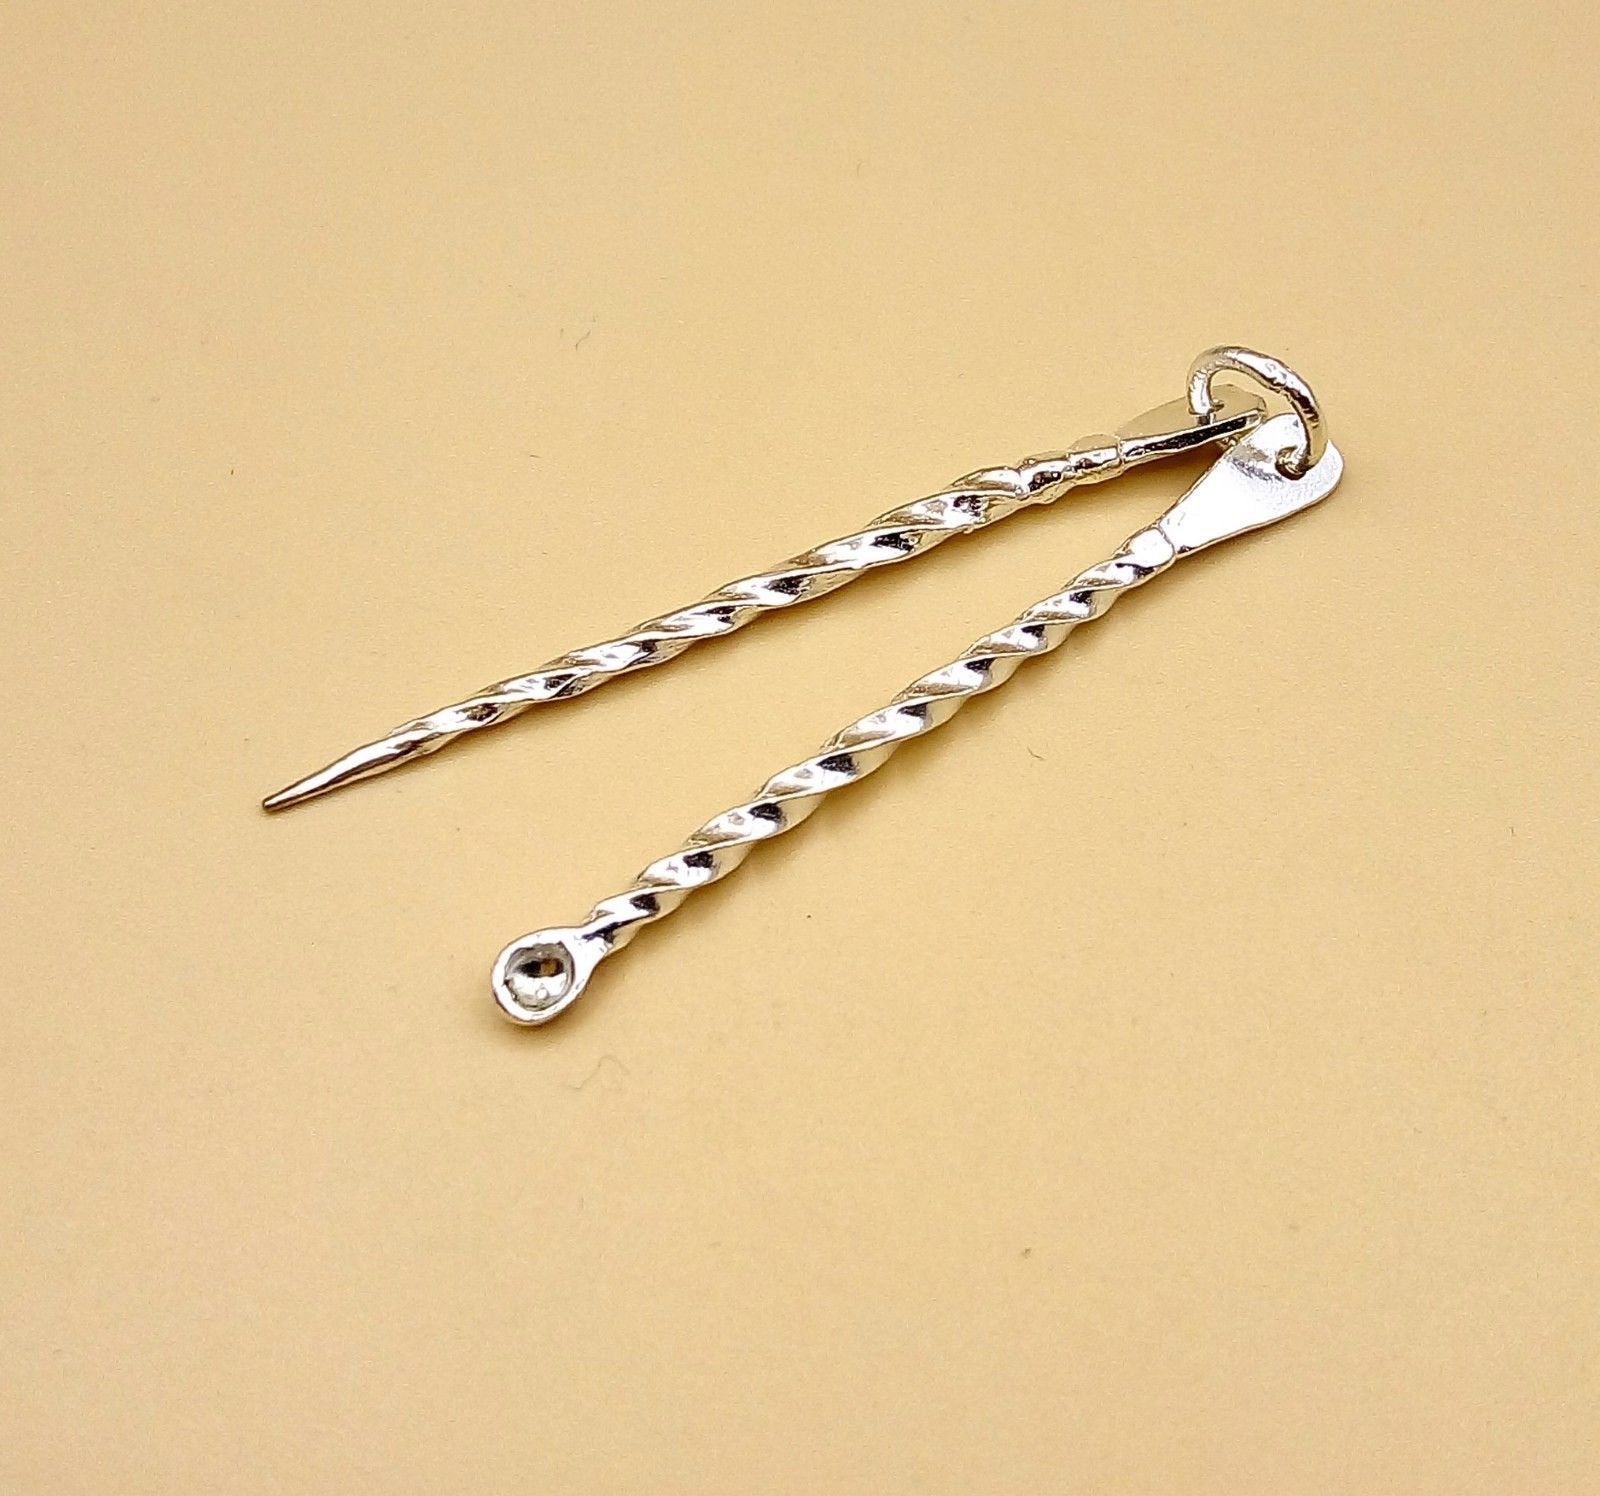 Silver handmade teeth cleaner and ear wax removal silver sticks fabulous twisted shape design - TRIBAL ORNAMENTS